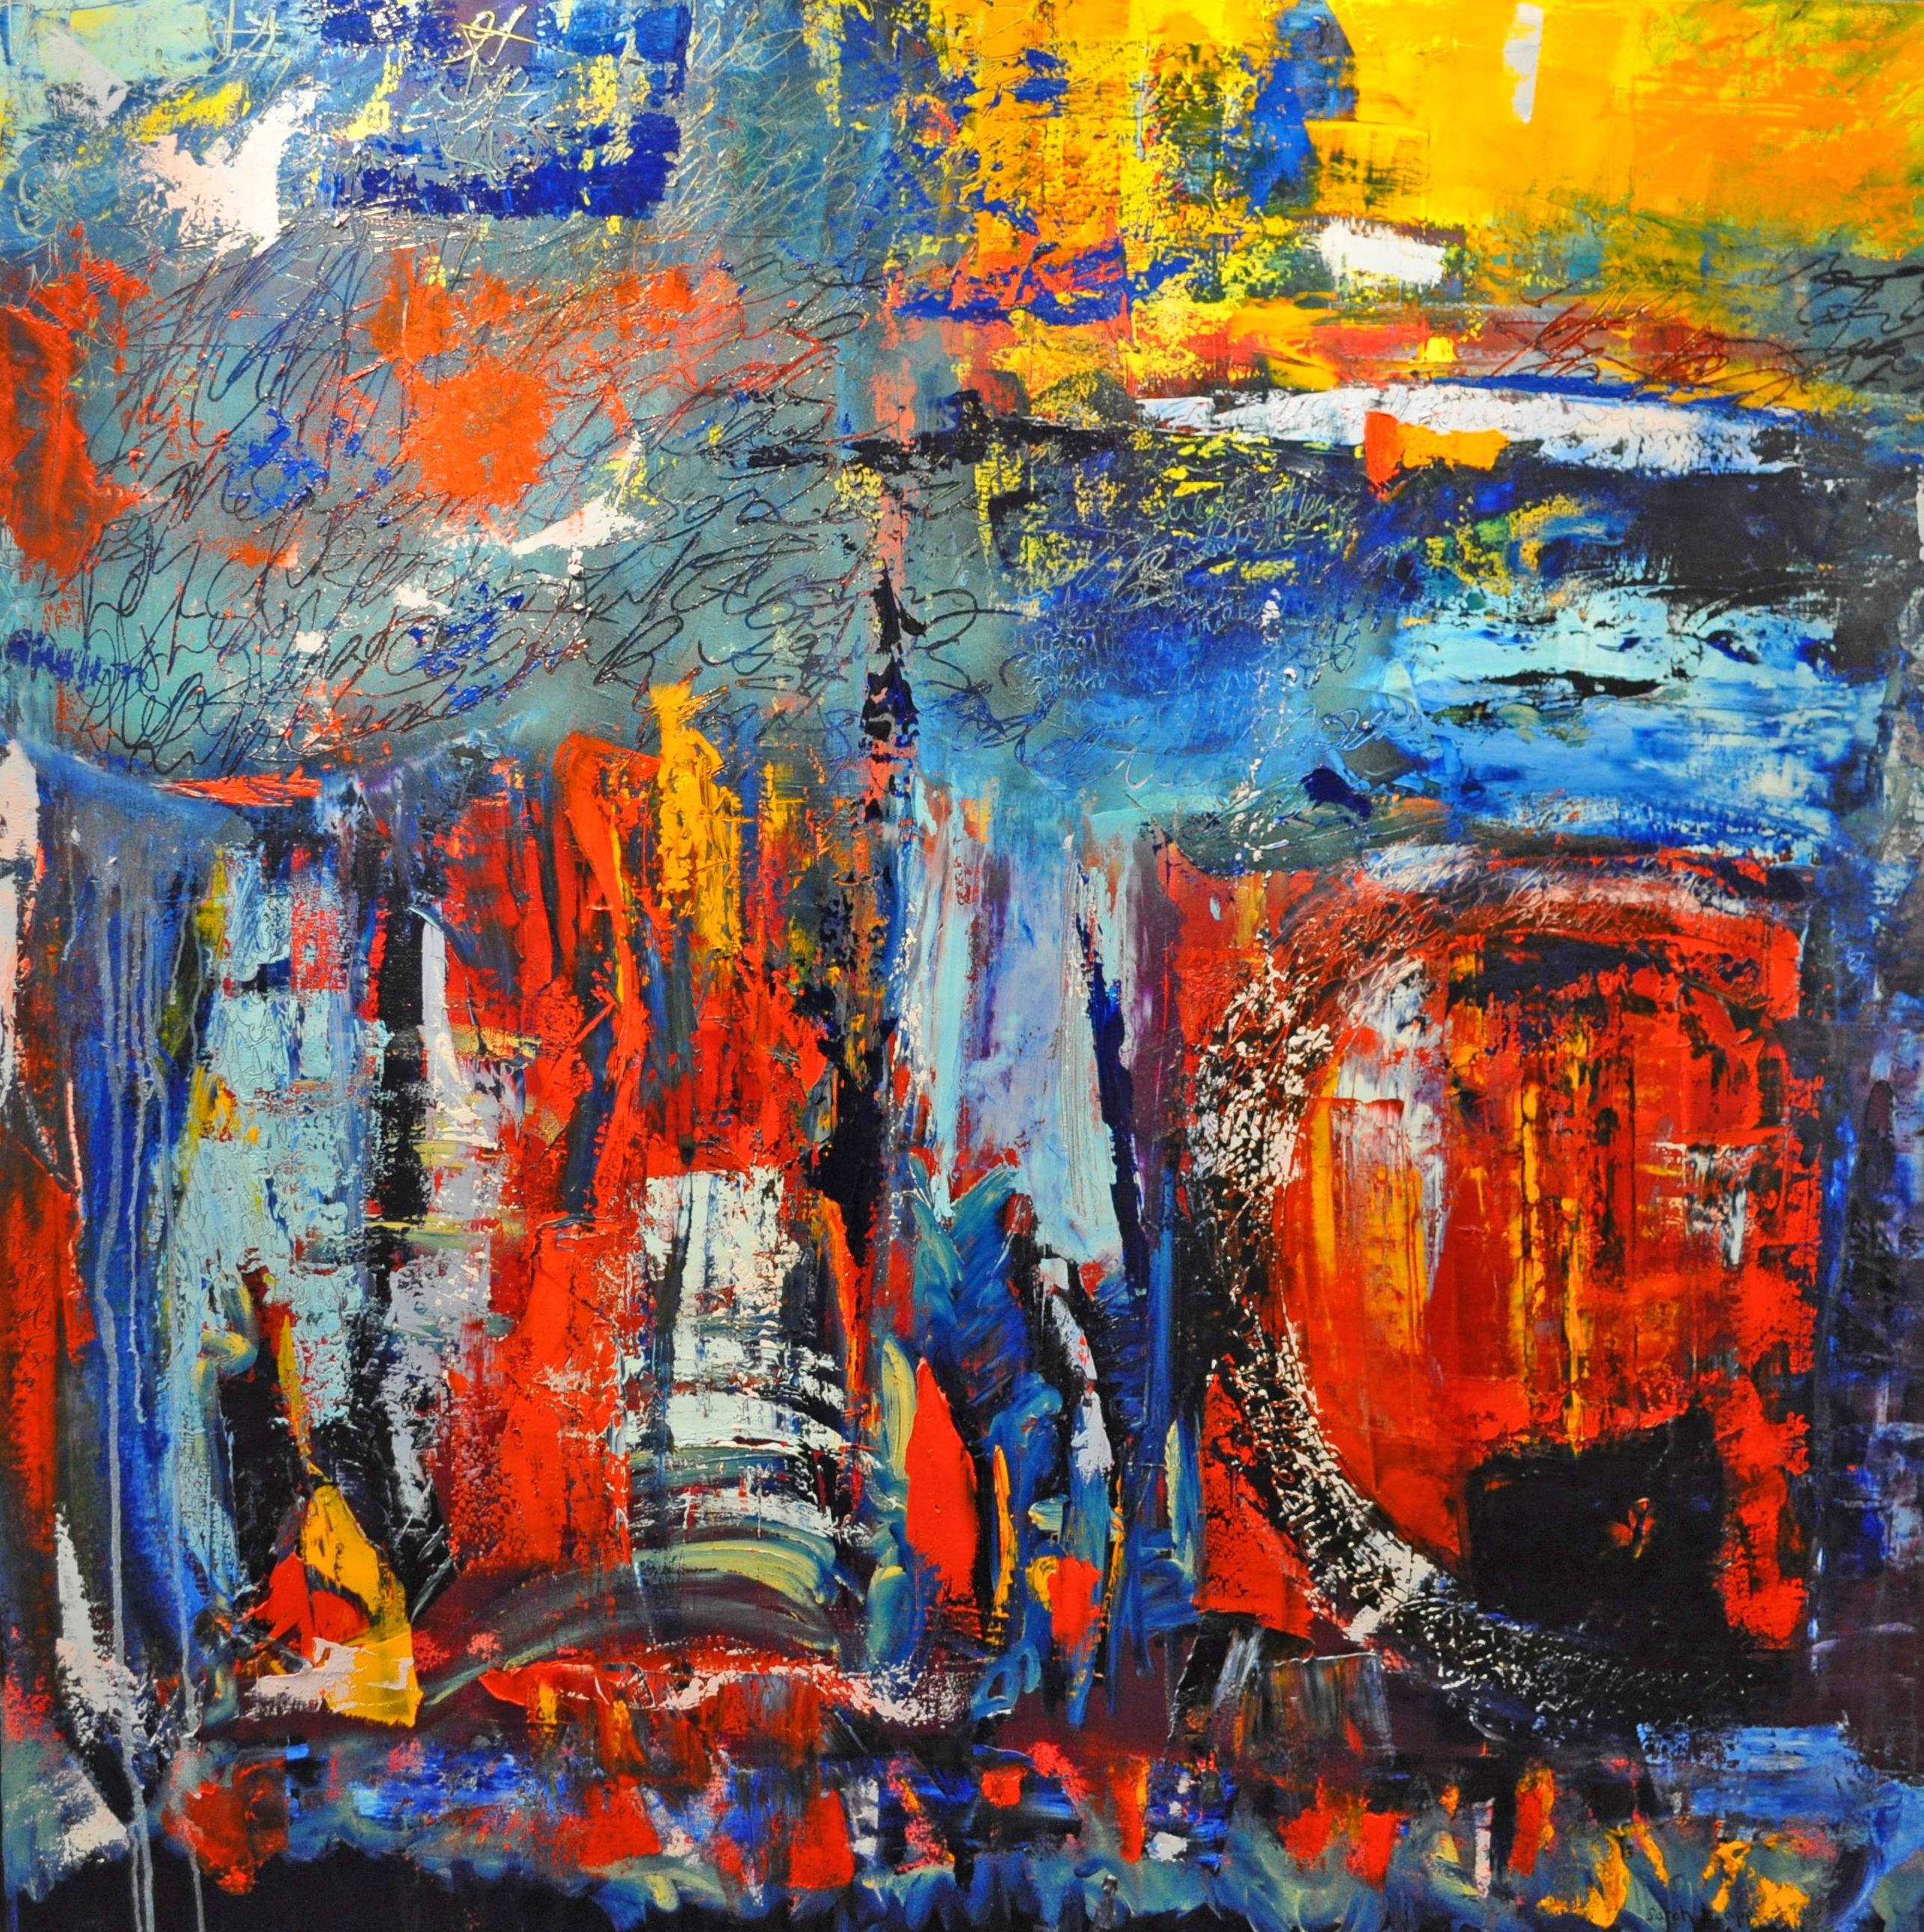 Sarah Lapp Abstract Painting - Night Lights II, Painting, Oil on Canvas